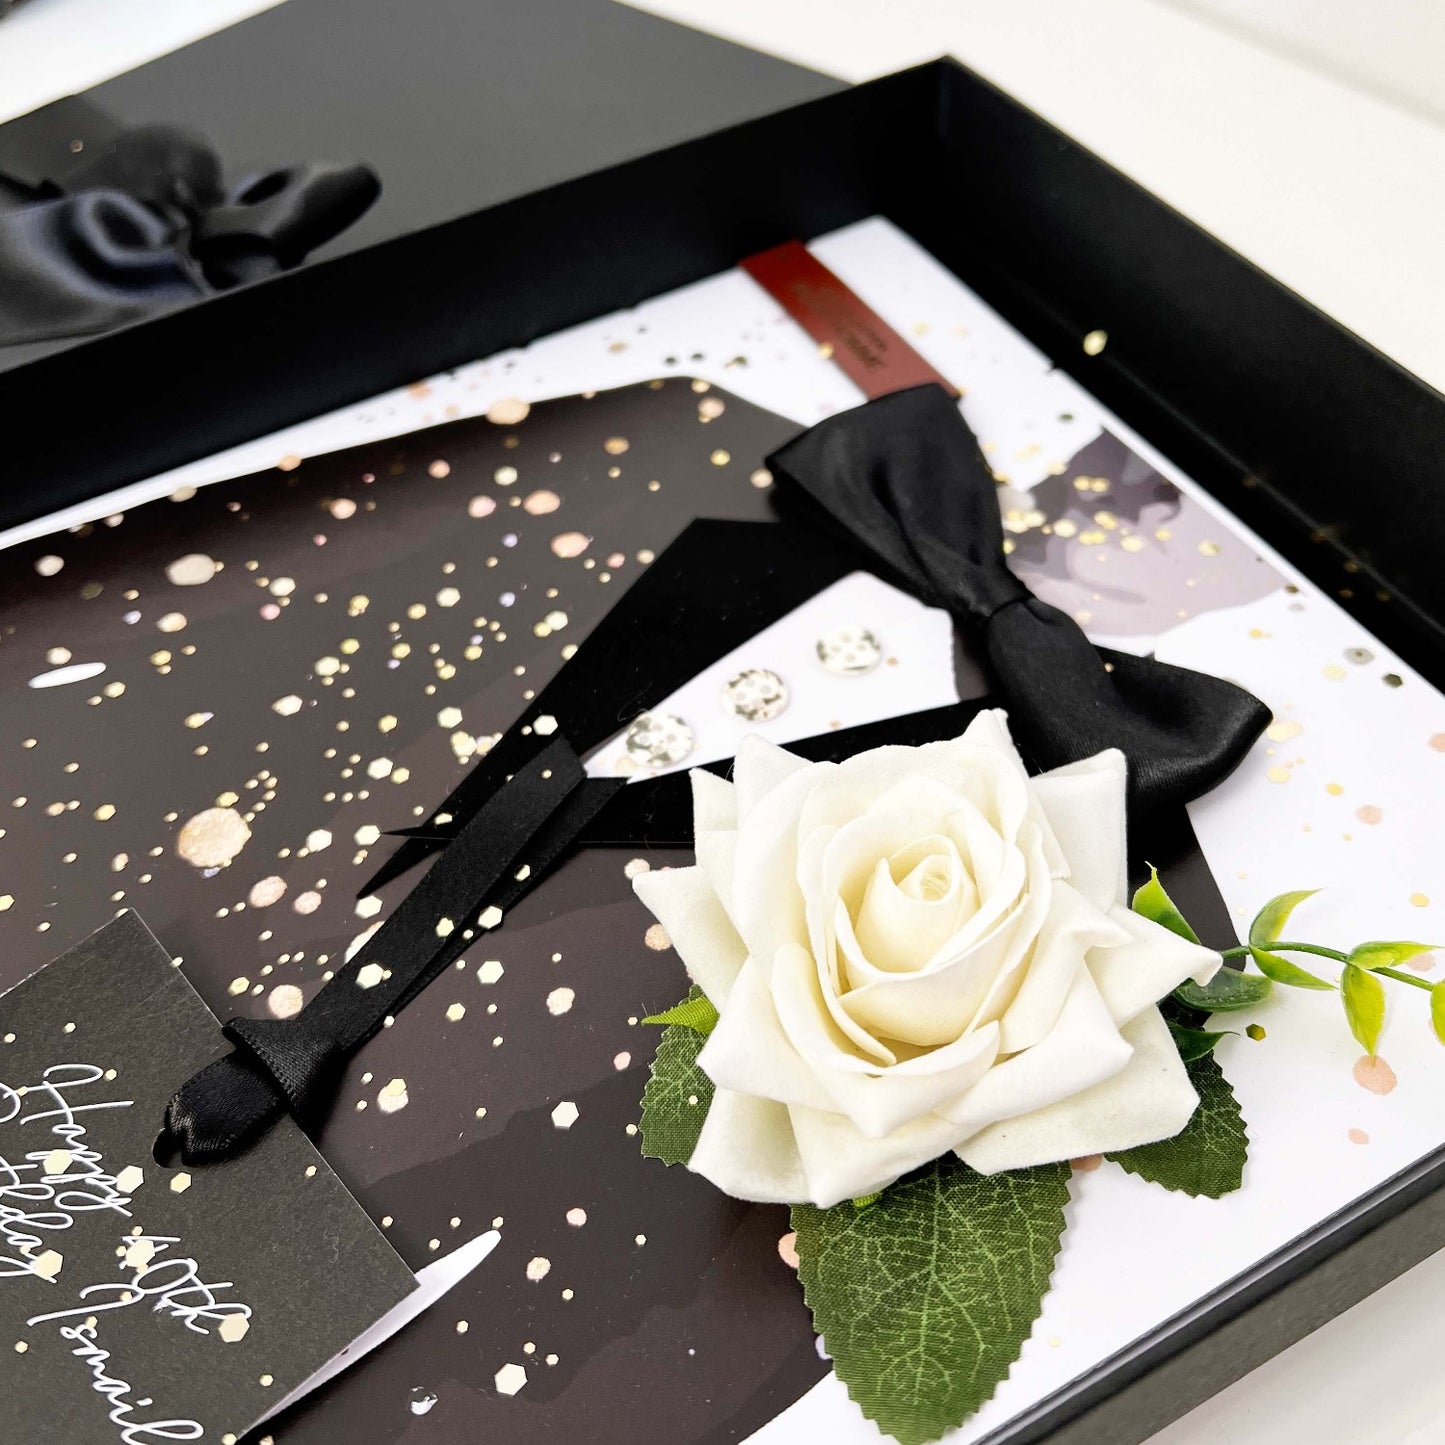 Ivory scented rose on mans tux card design - choose your own colour rose